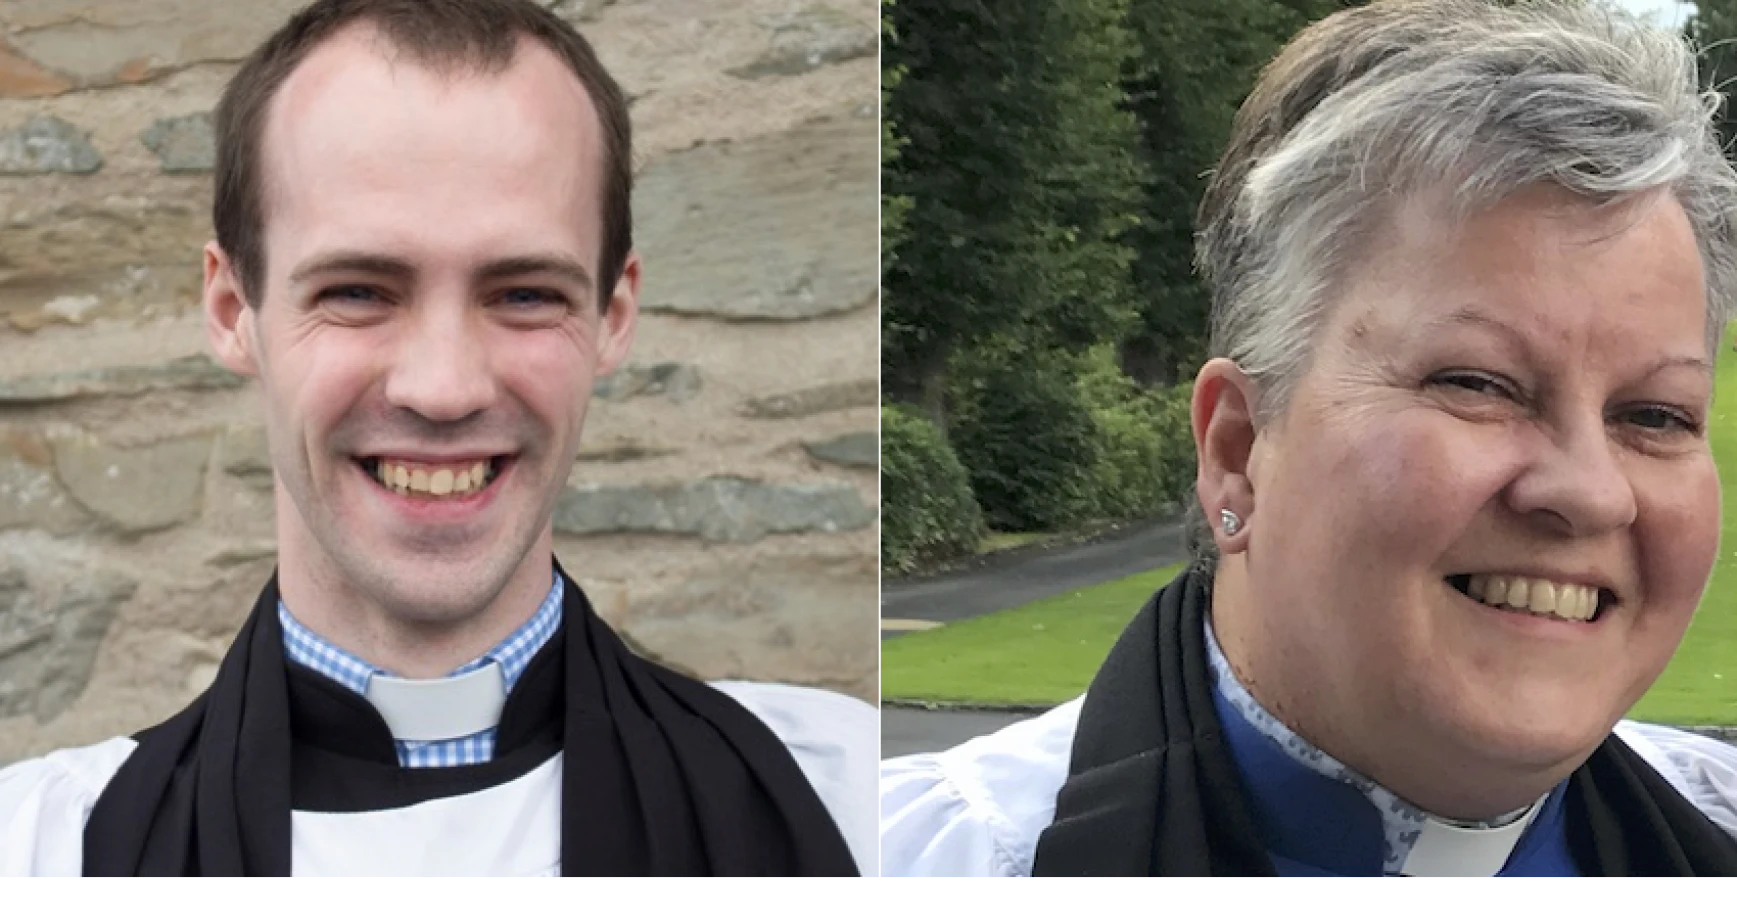 Bishop David appoints two Chaplains